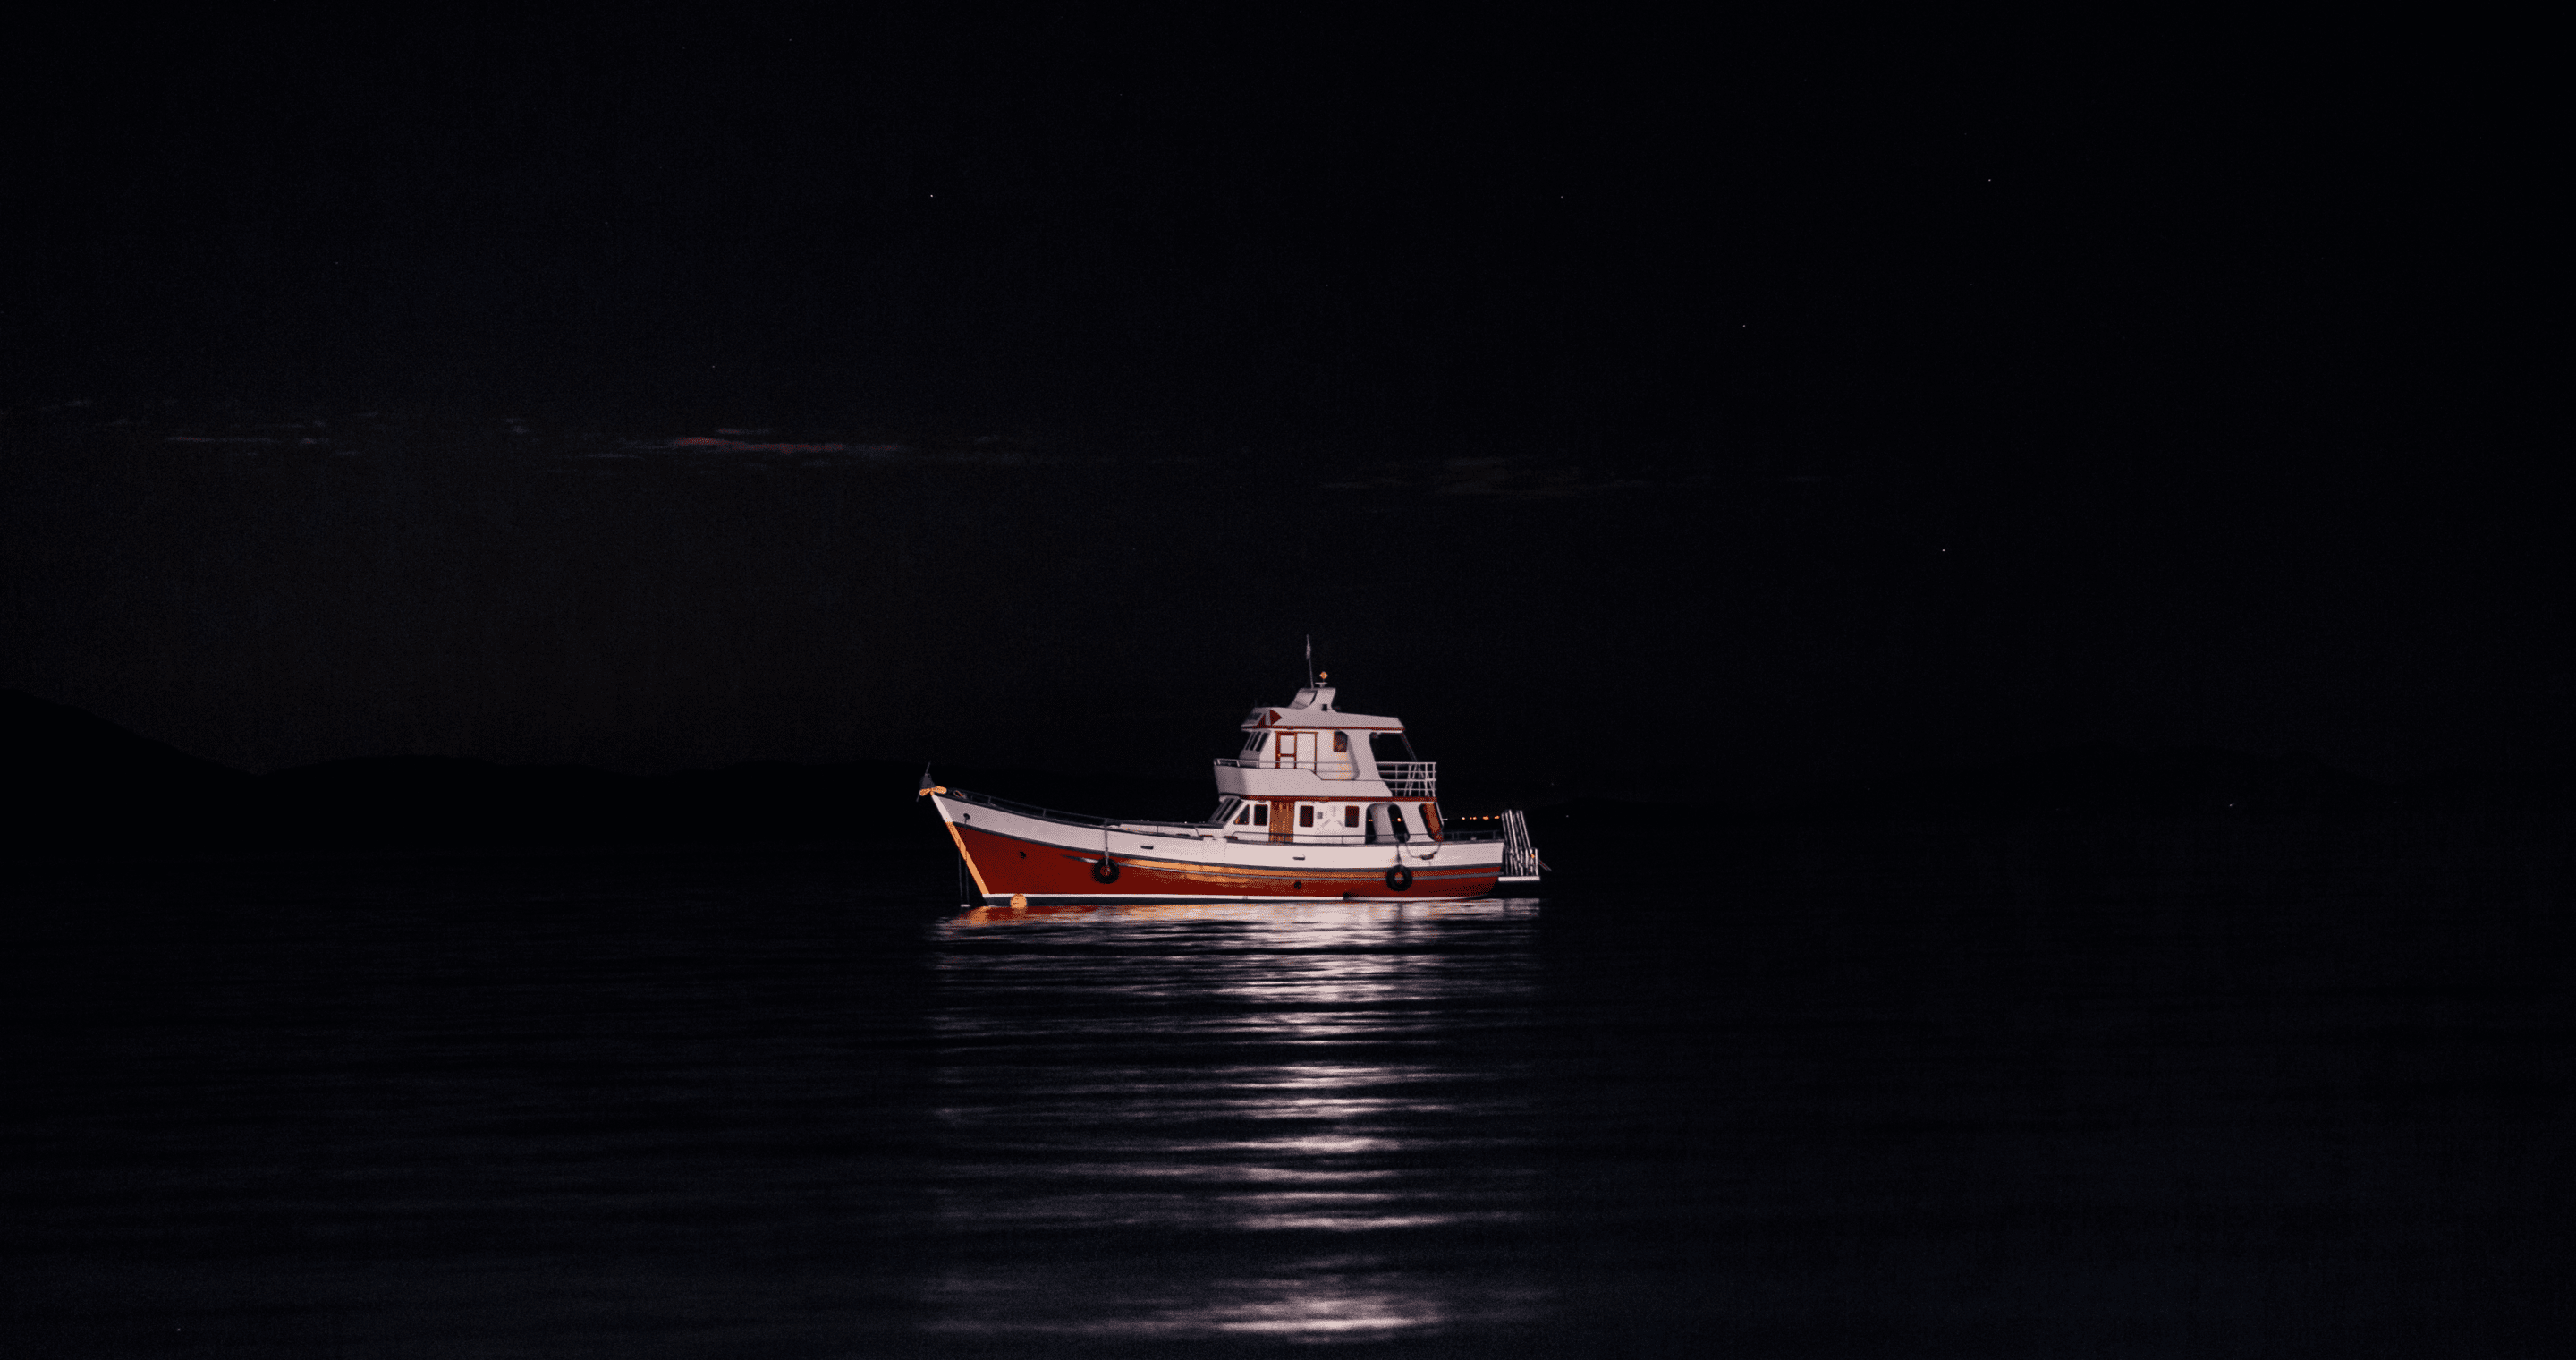 Expert Boat safety Tips for Navigating Your Boat at Night